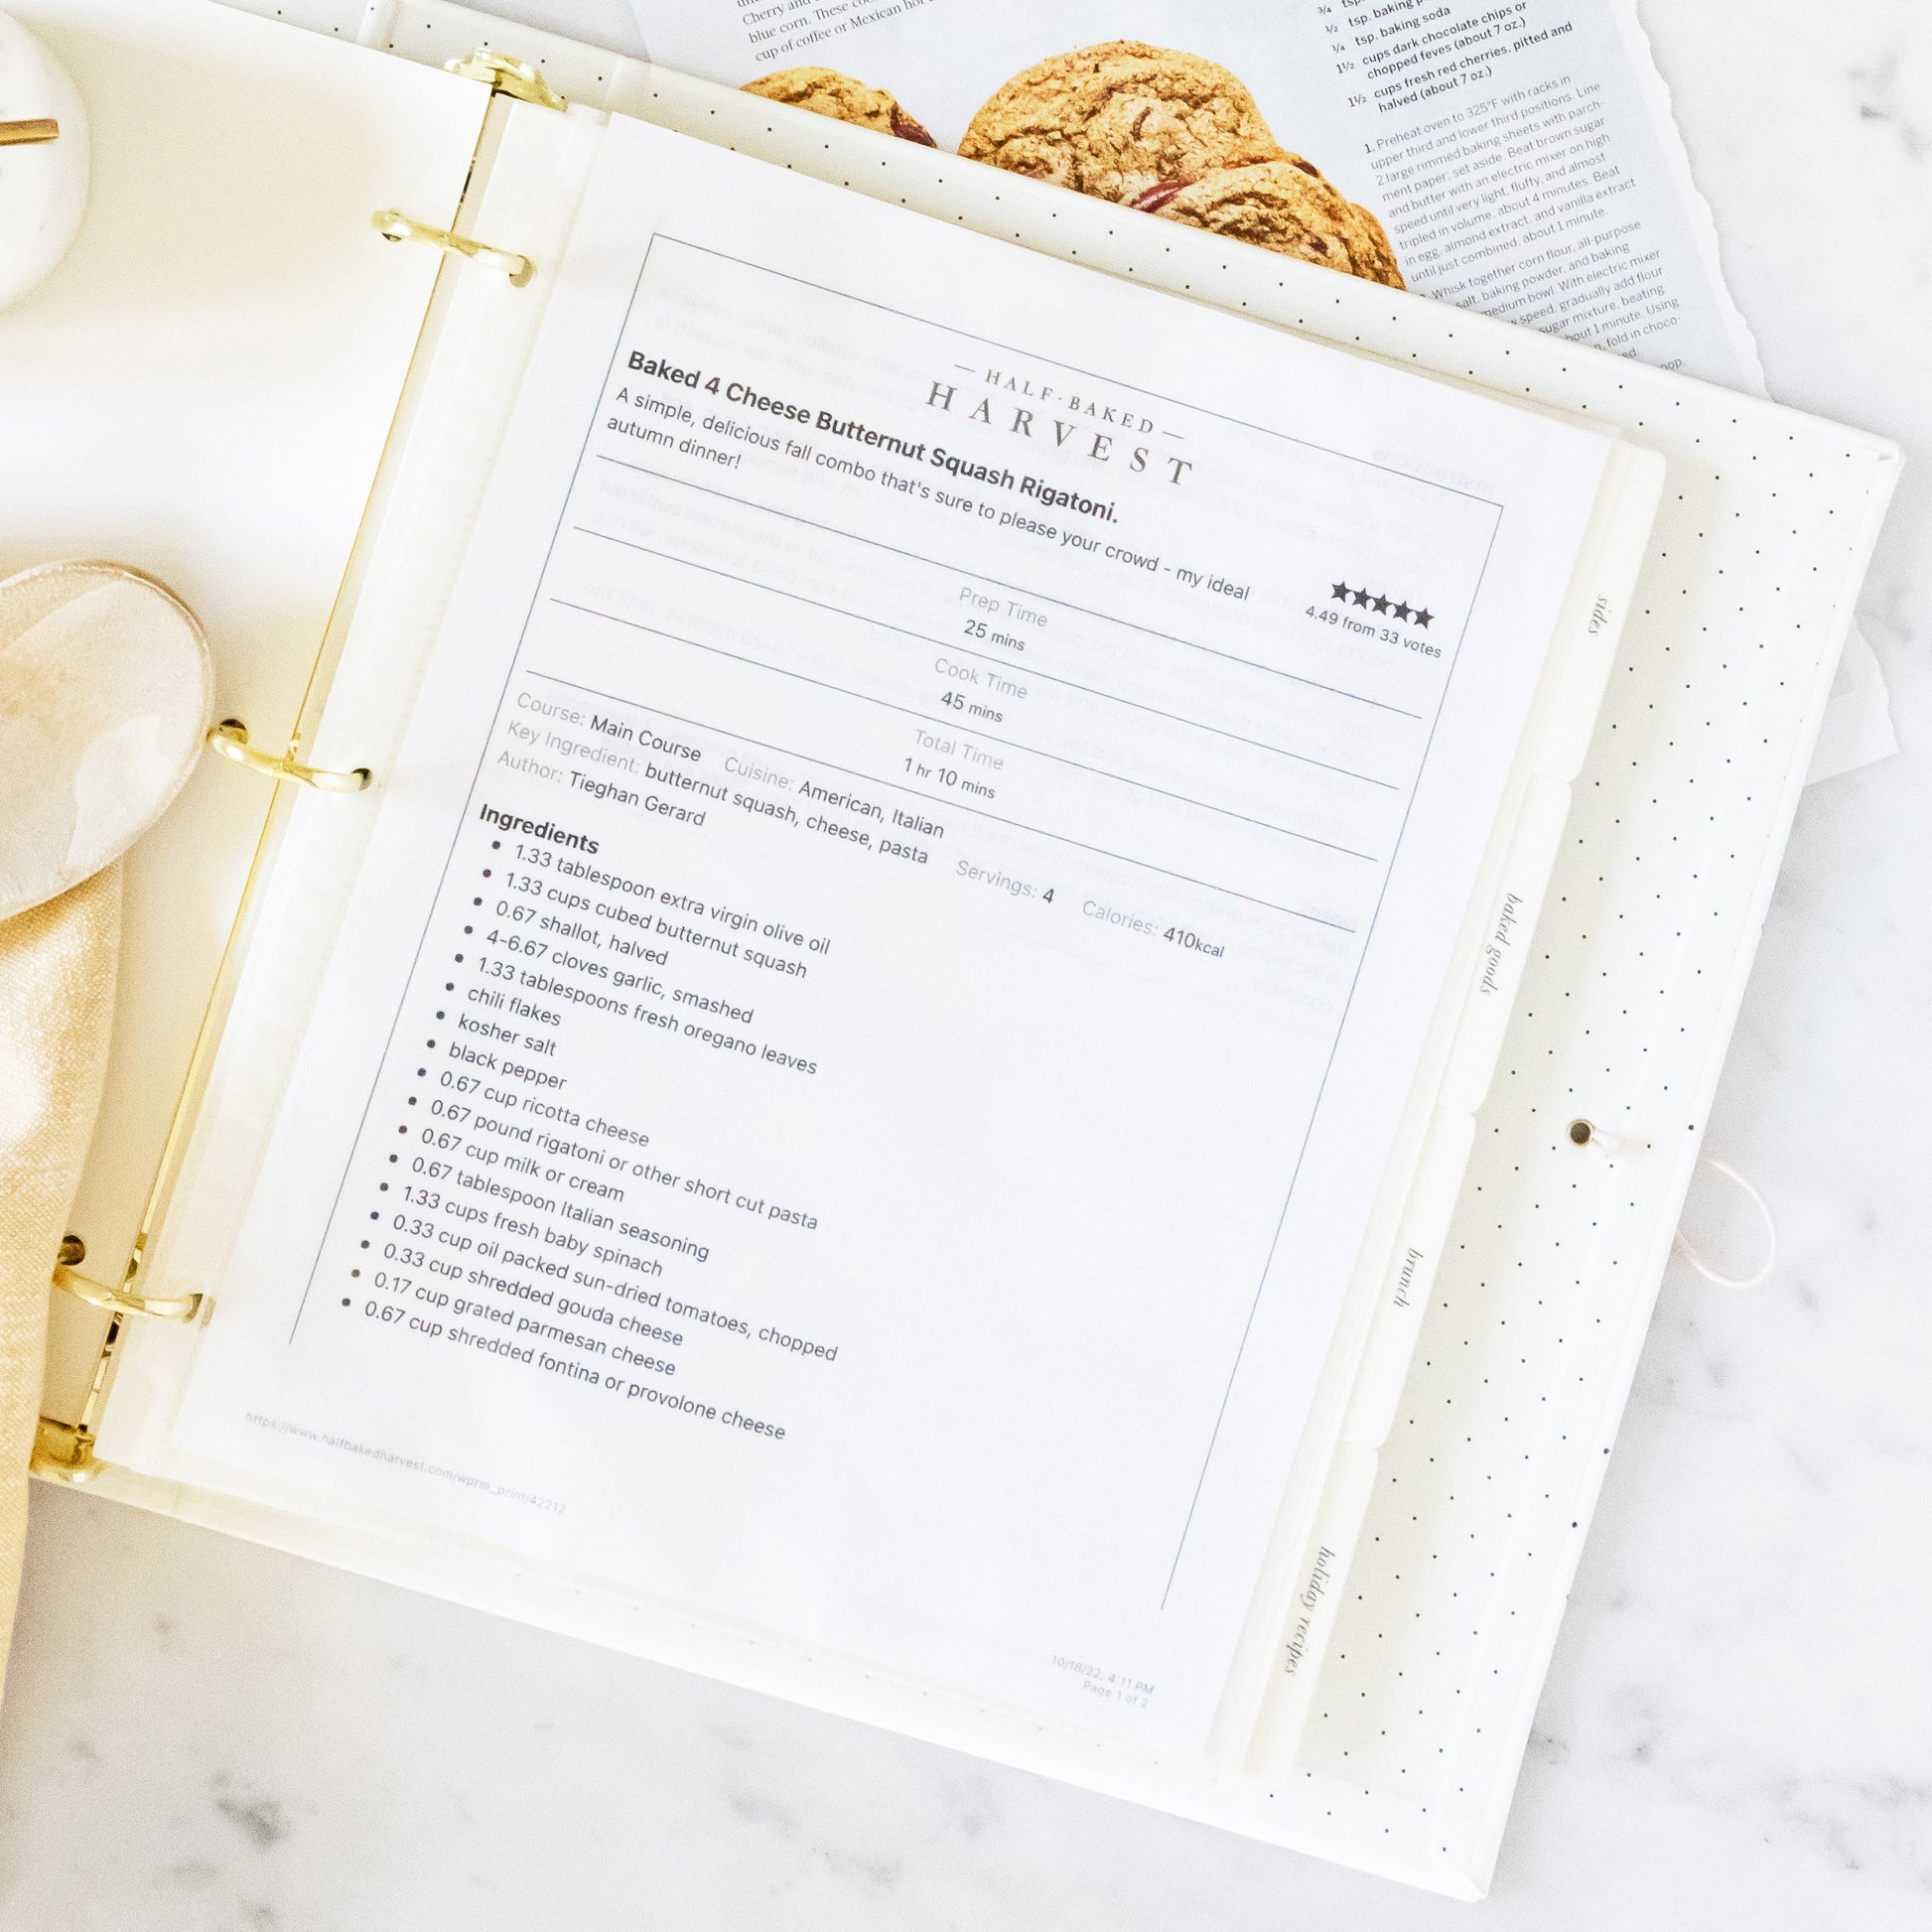 Make Your Own Recipe Binder: Scrapbook Style - Now That's Thrifty!